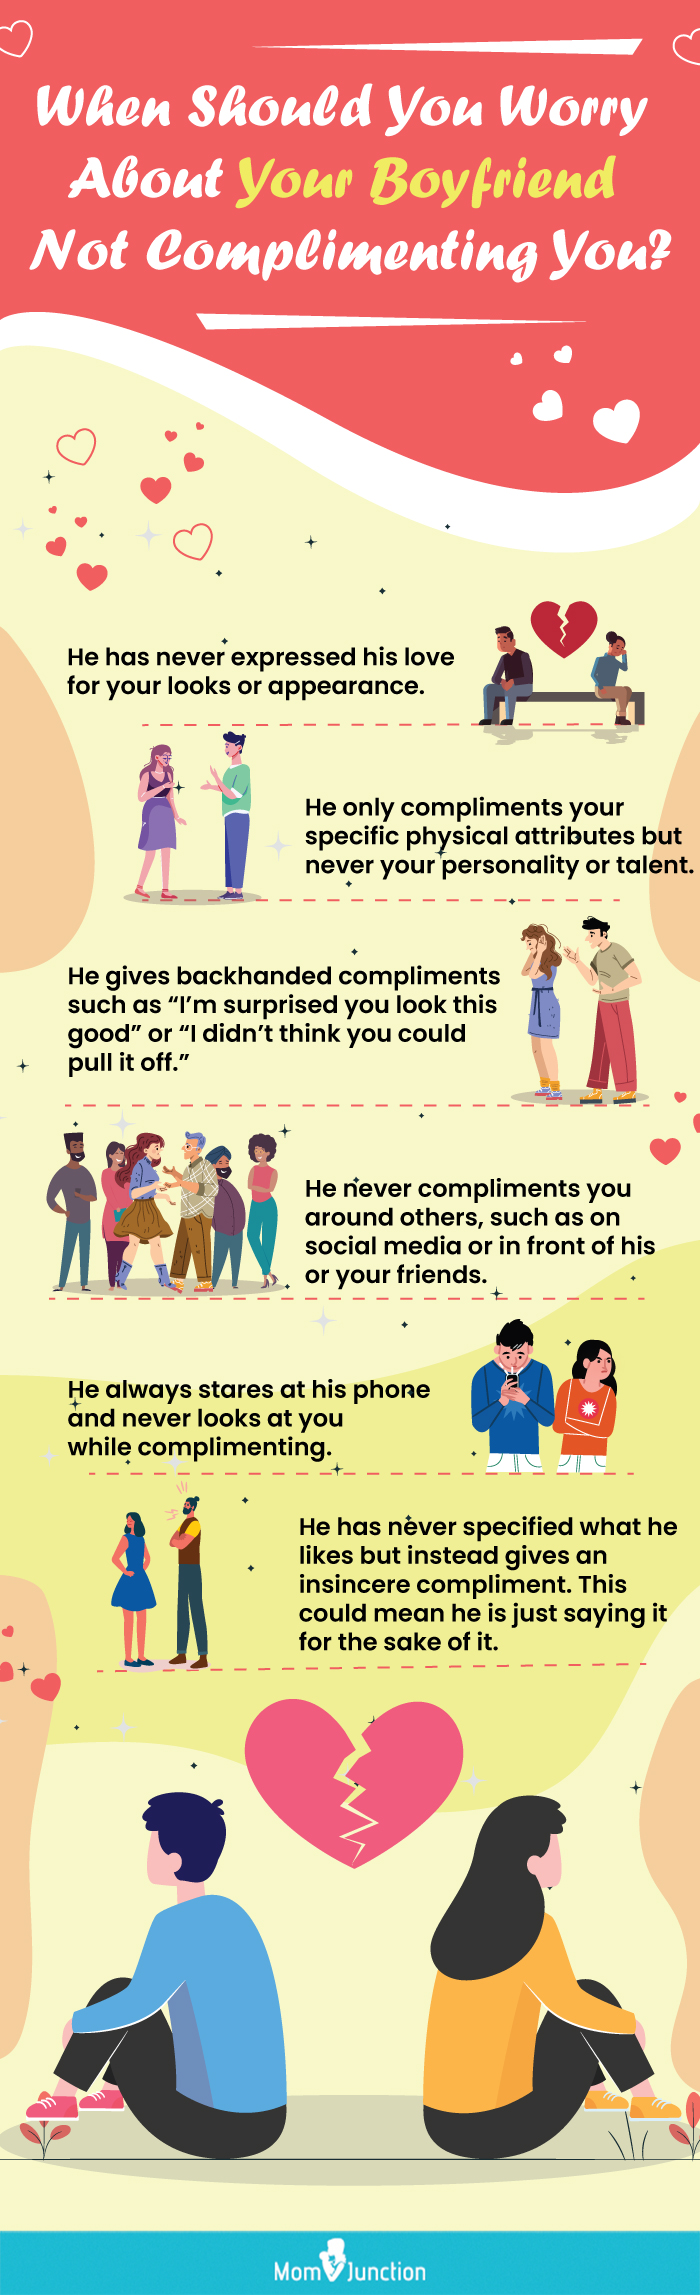 when should you worry about your boyfriend not complimenting you